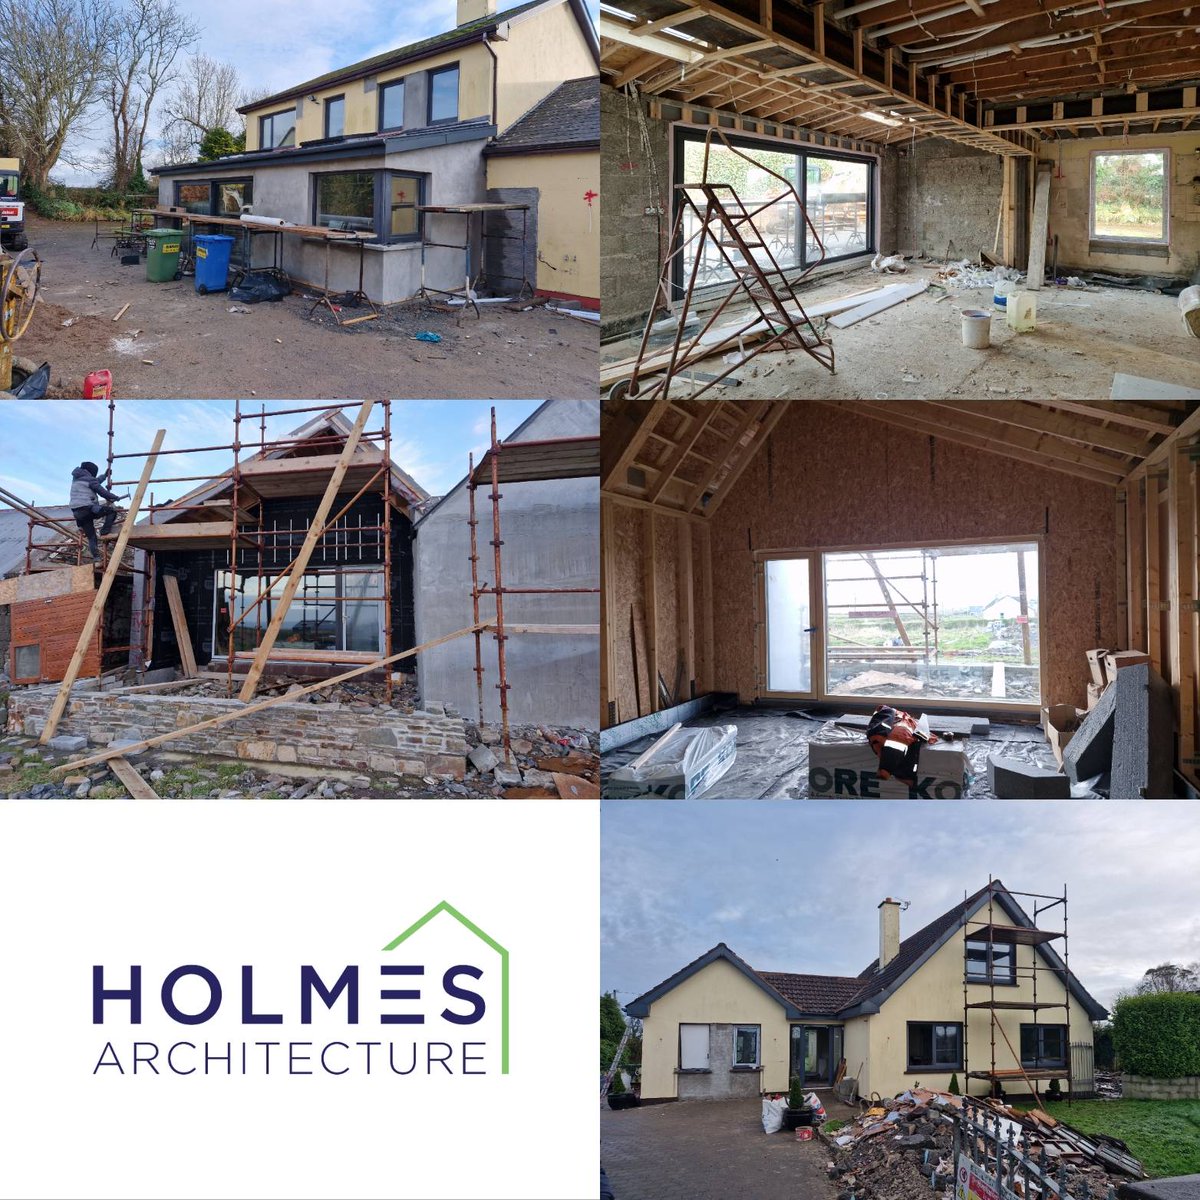 Happy New Year.
A few snapshots from our pre-Christmas site visits.
Looking forward to seeing these completed in the next
few months. #housedesign #irishhomes #construction
#homearchitecture #homeextension #homerefurb